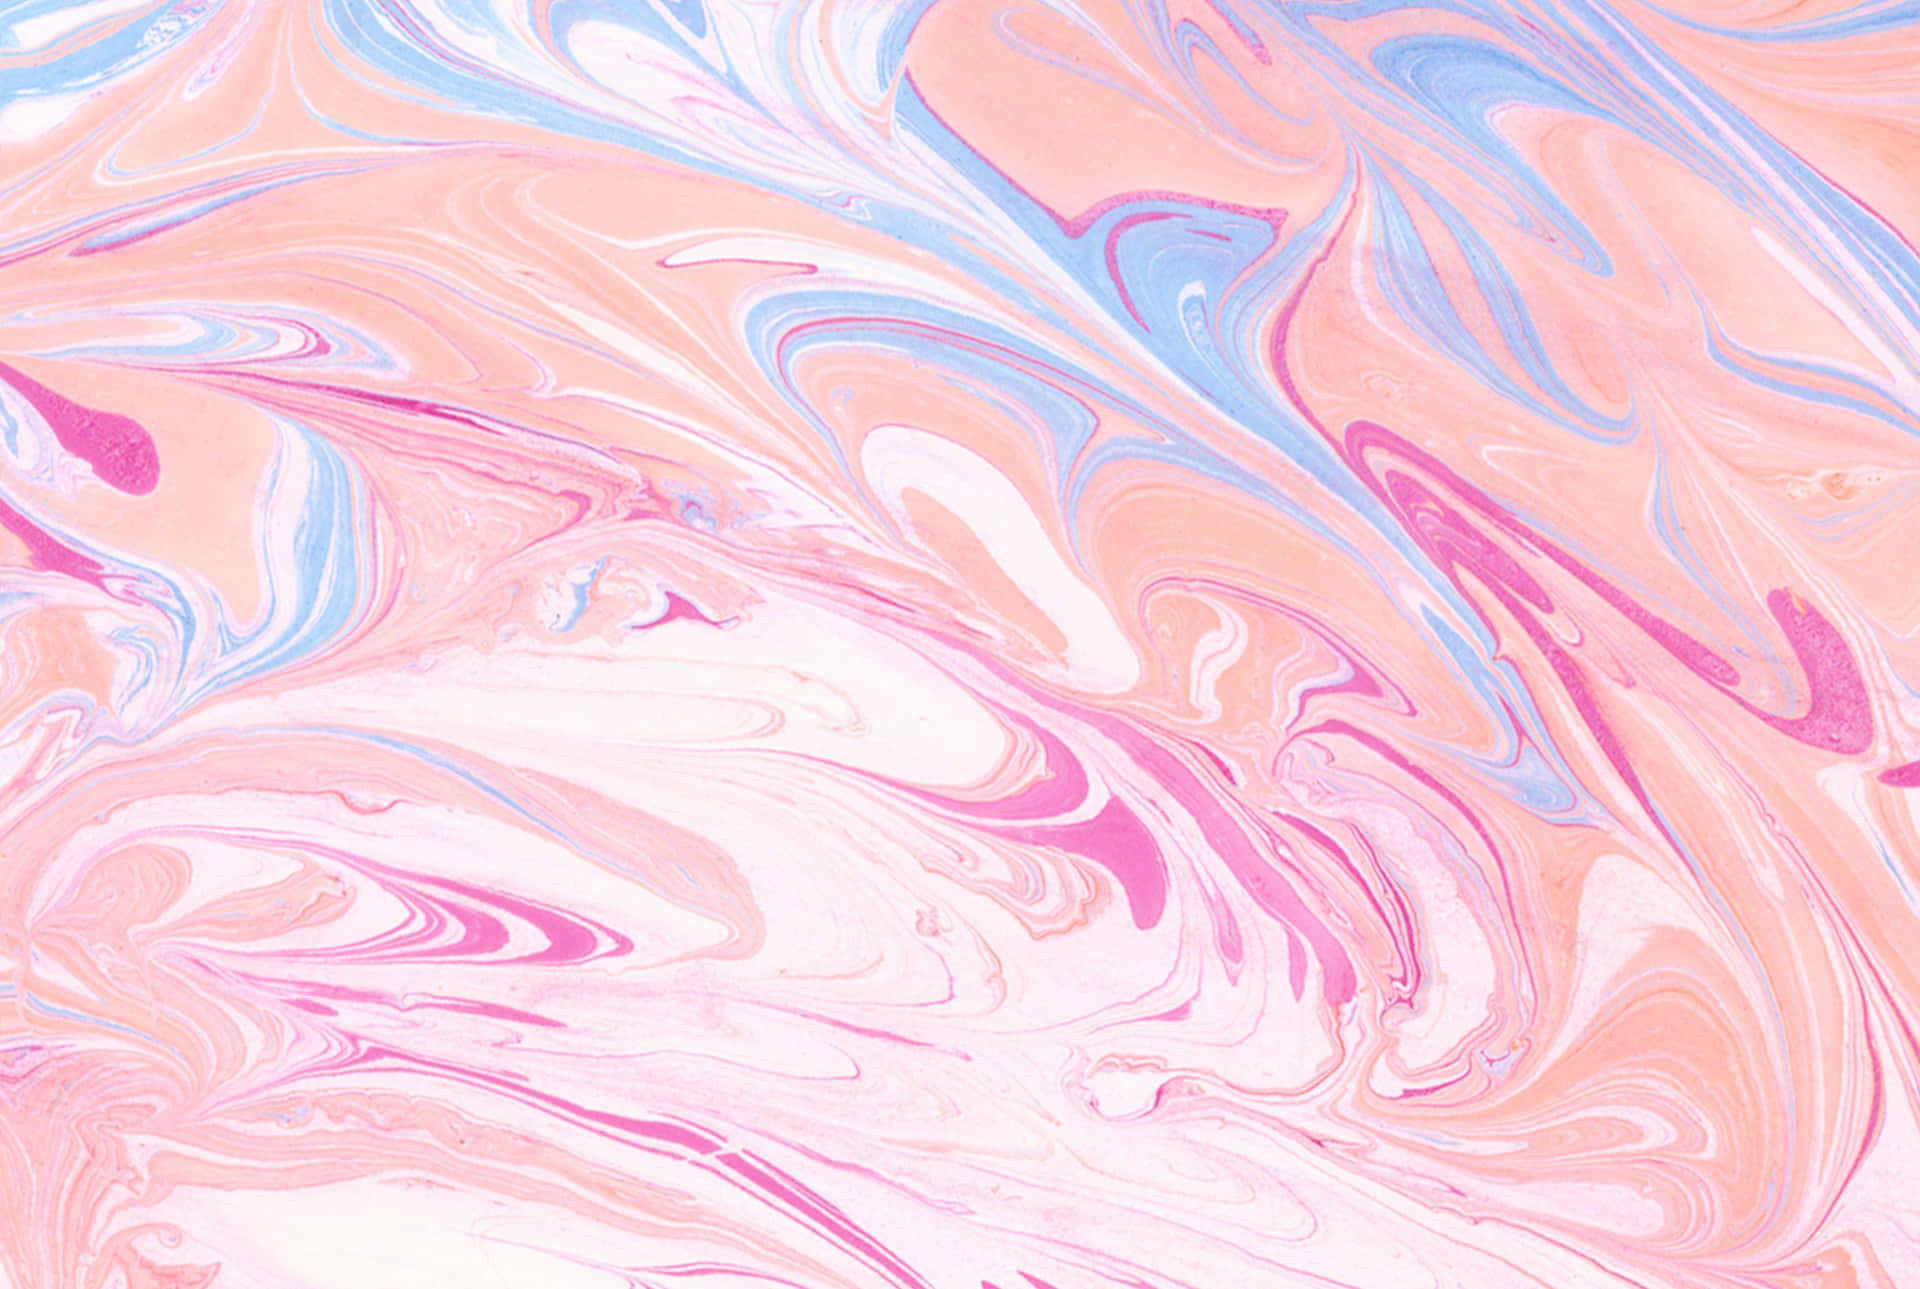 Pink Marble Background Wallpaper